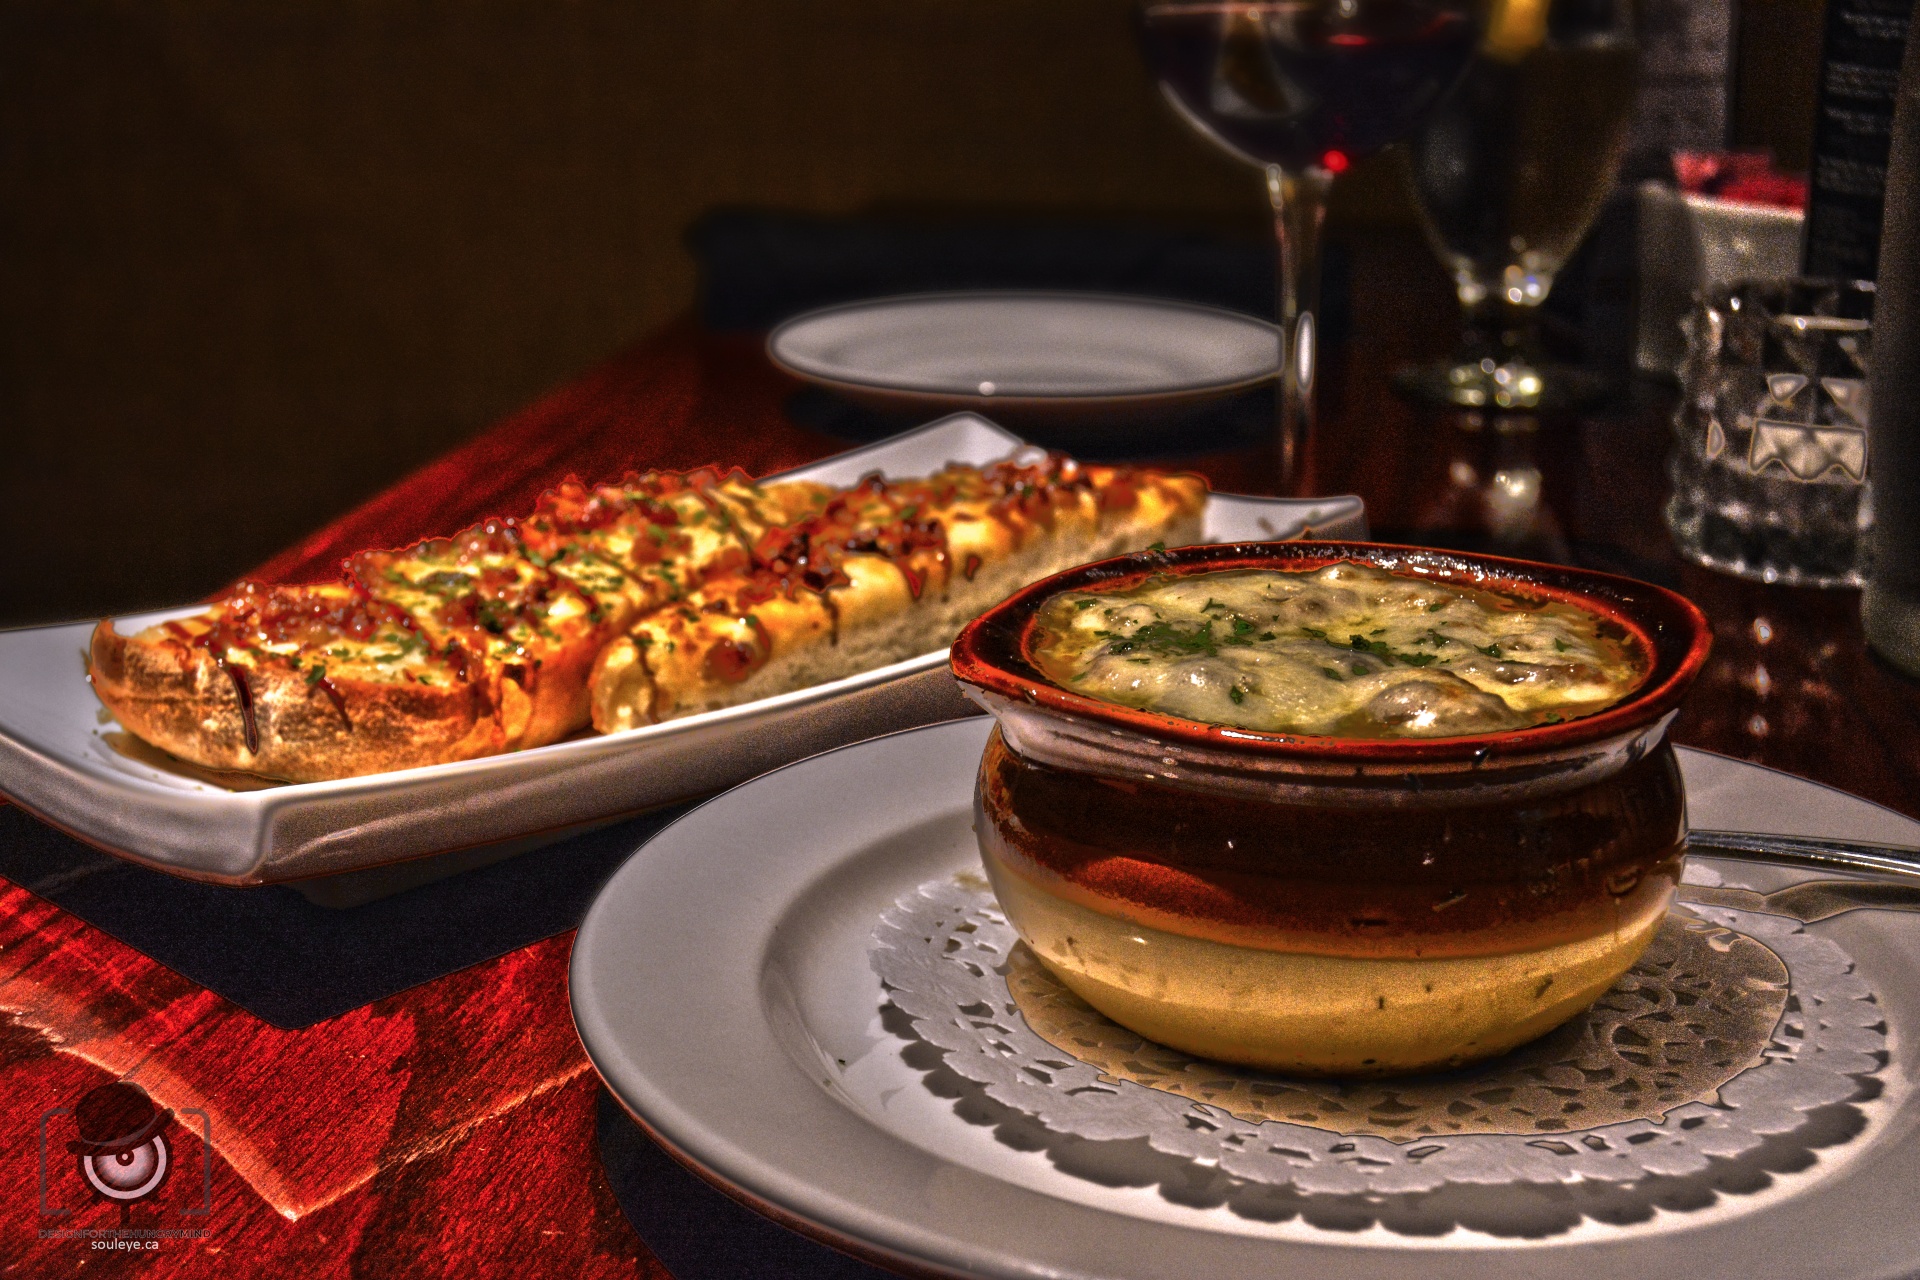 Dad's Favorite French Onion Soup